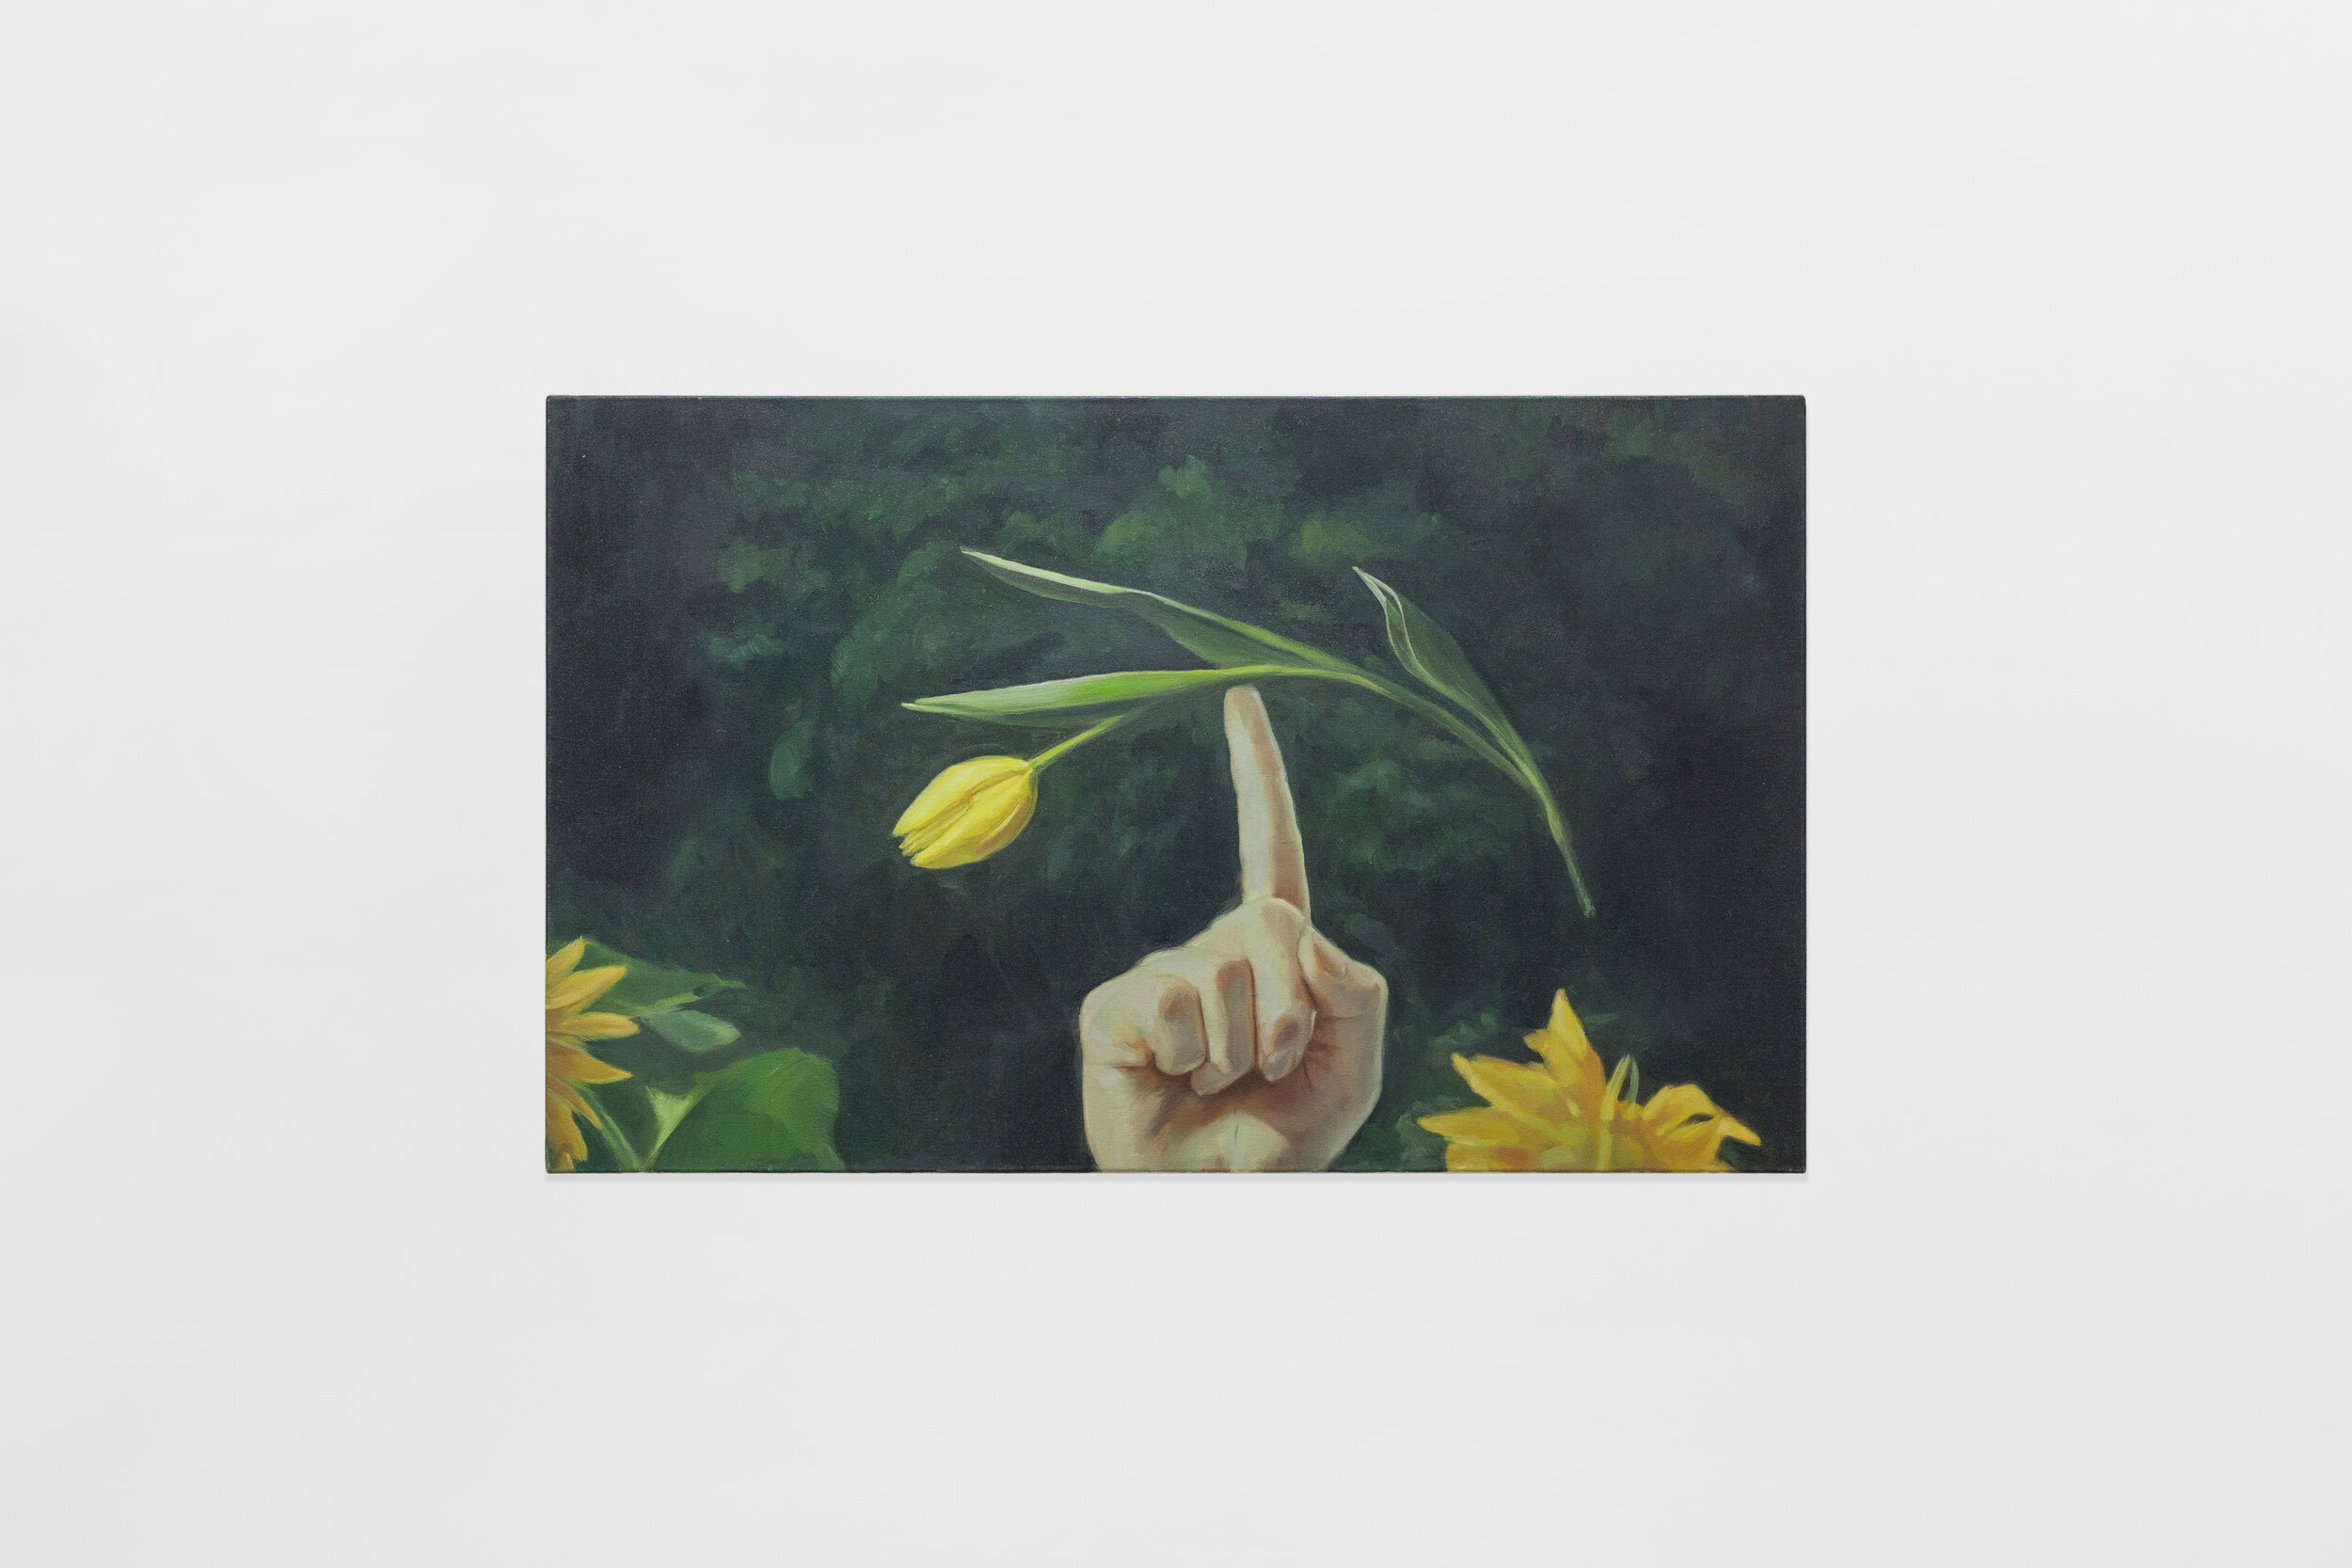  Shannon Cartier Lucy,  Tulip on Finger , 2019, oil on canvas, 21 x 32 in. 